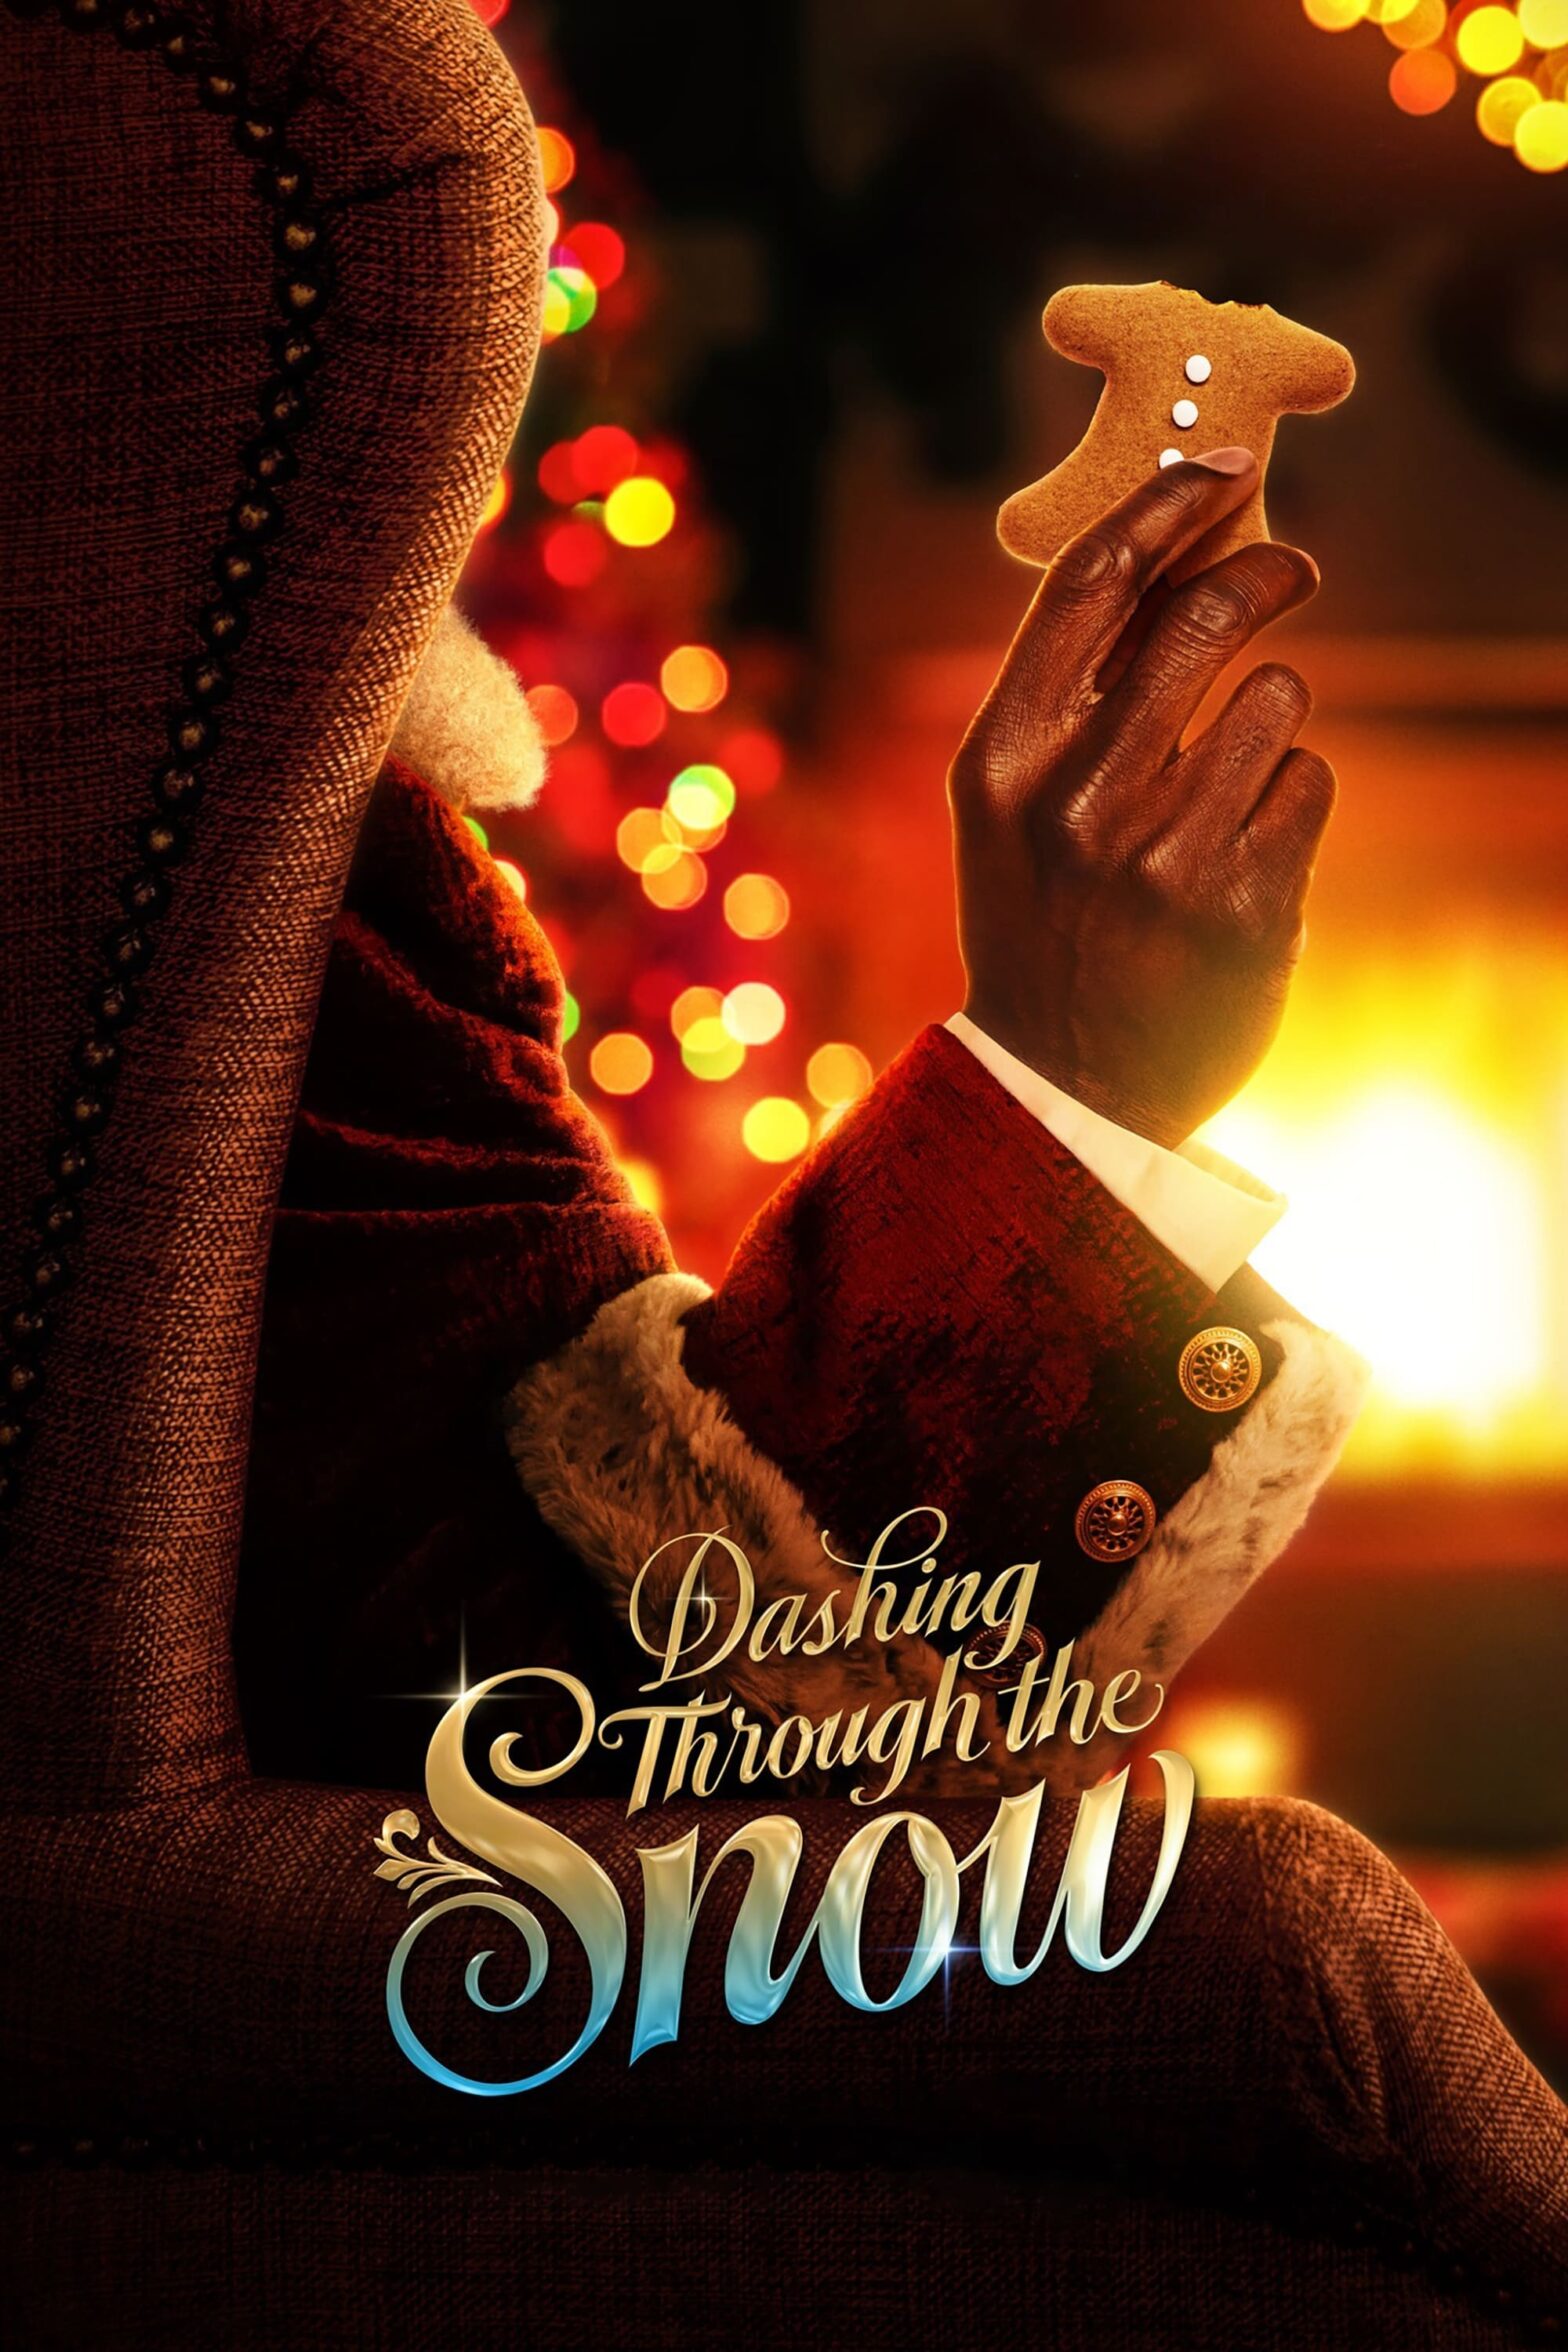 Poster for the movie "Dashing Through the Snow"